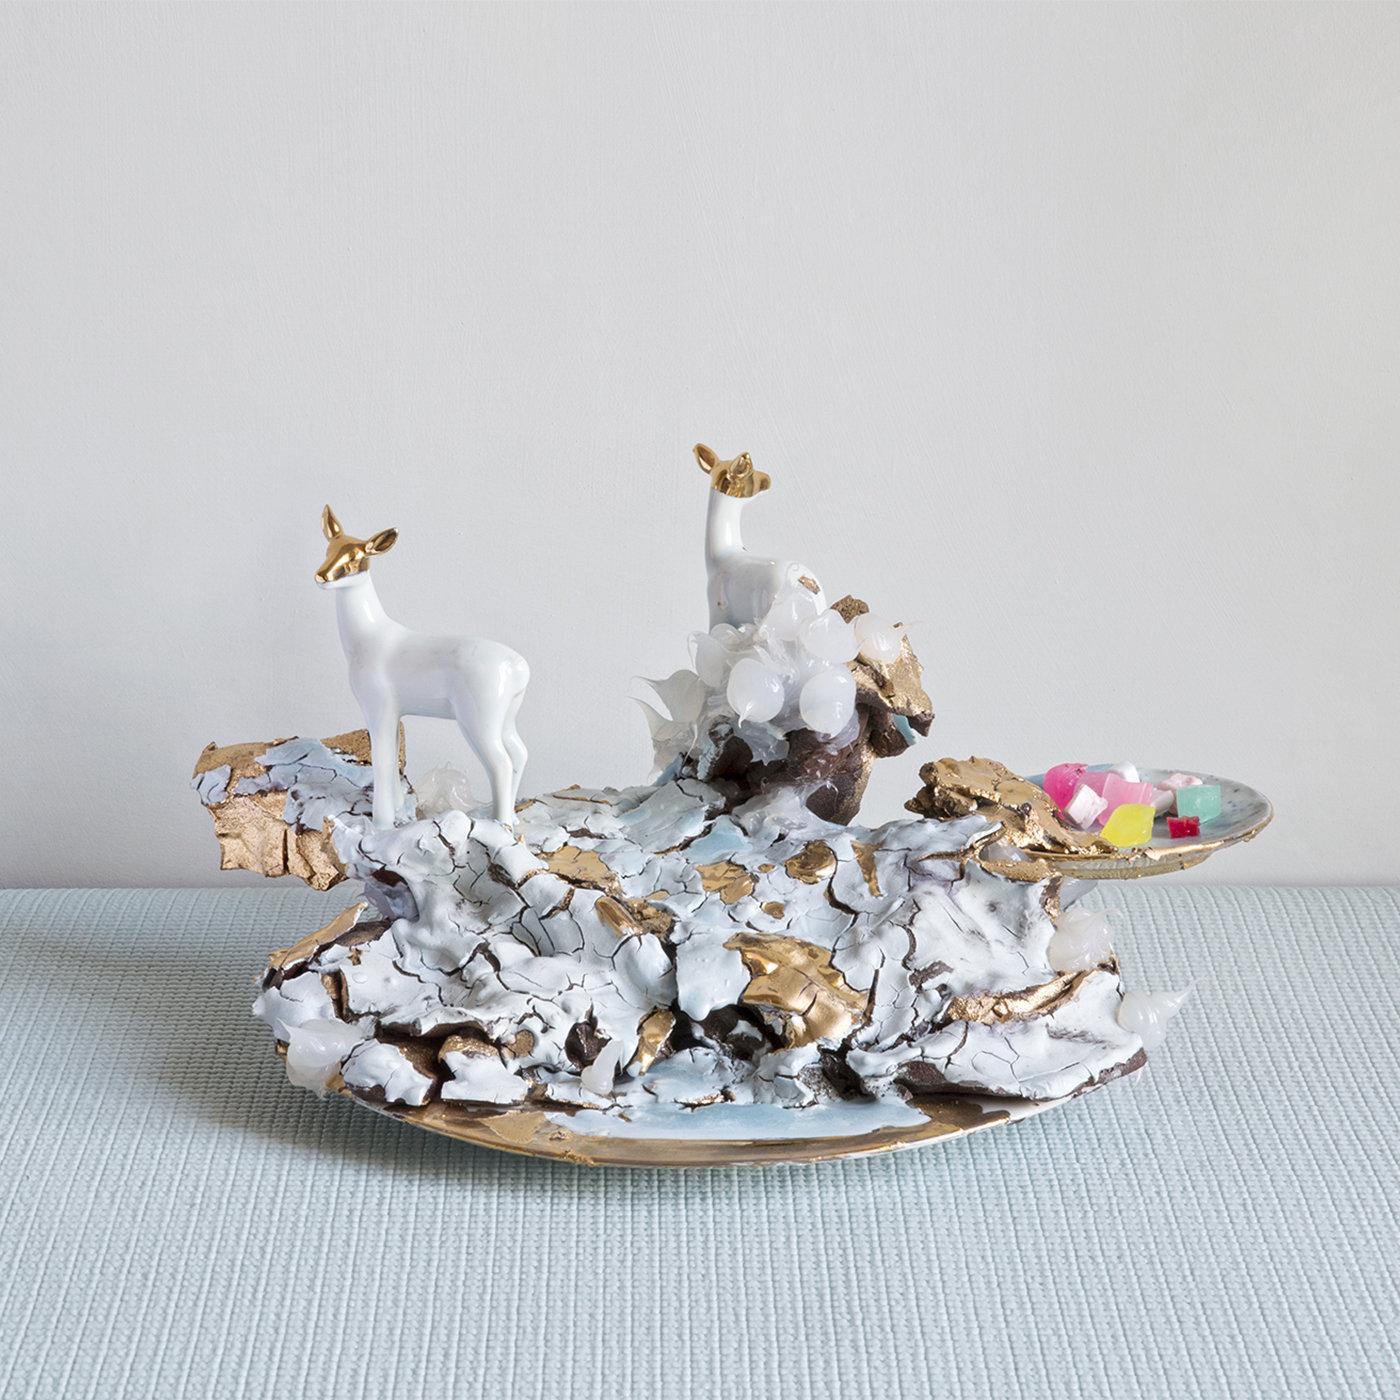 Two small white animals stand looking at their surroundings on a mound of cracked earth in pale blue and gold. These pieces are made by experimenting in total freedom, with the addition of silicone, crystals, porcelain animals and some small